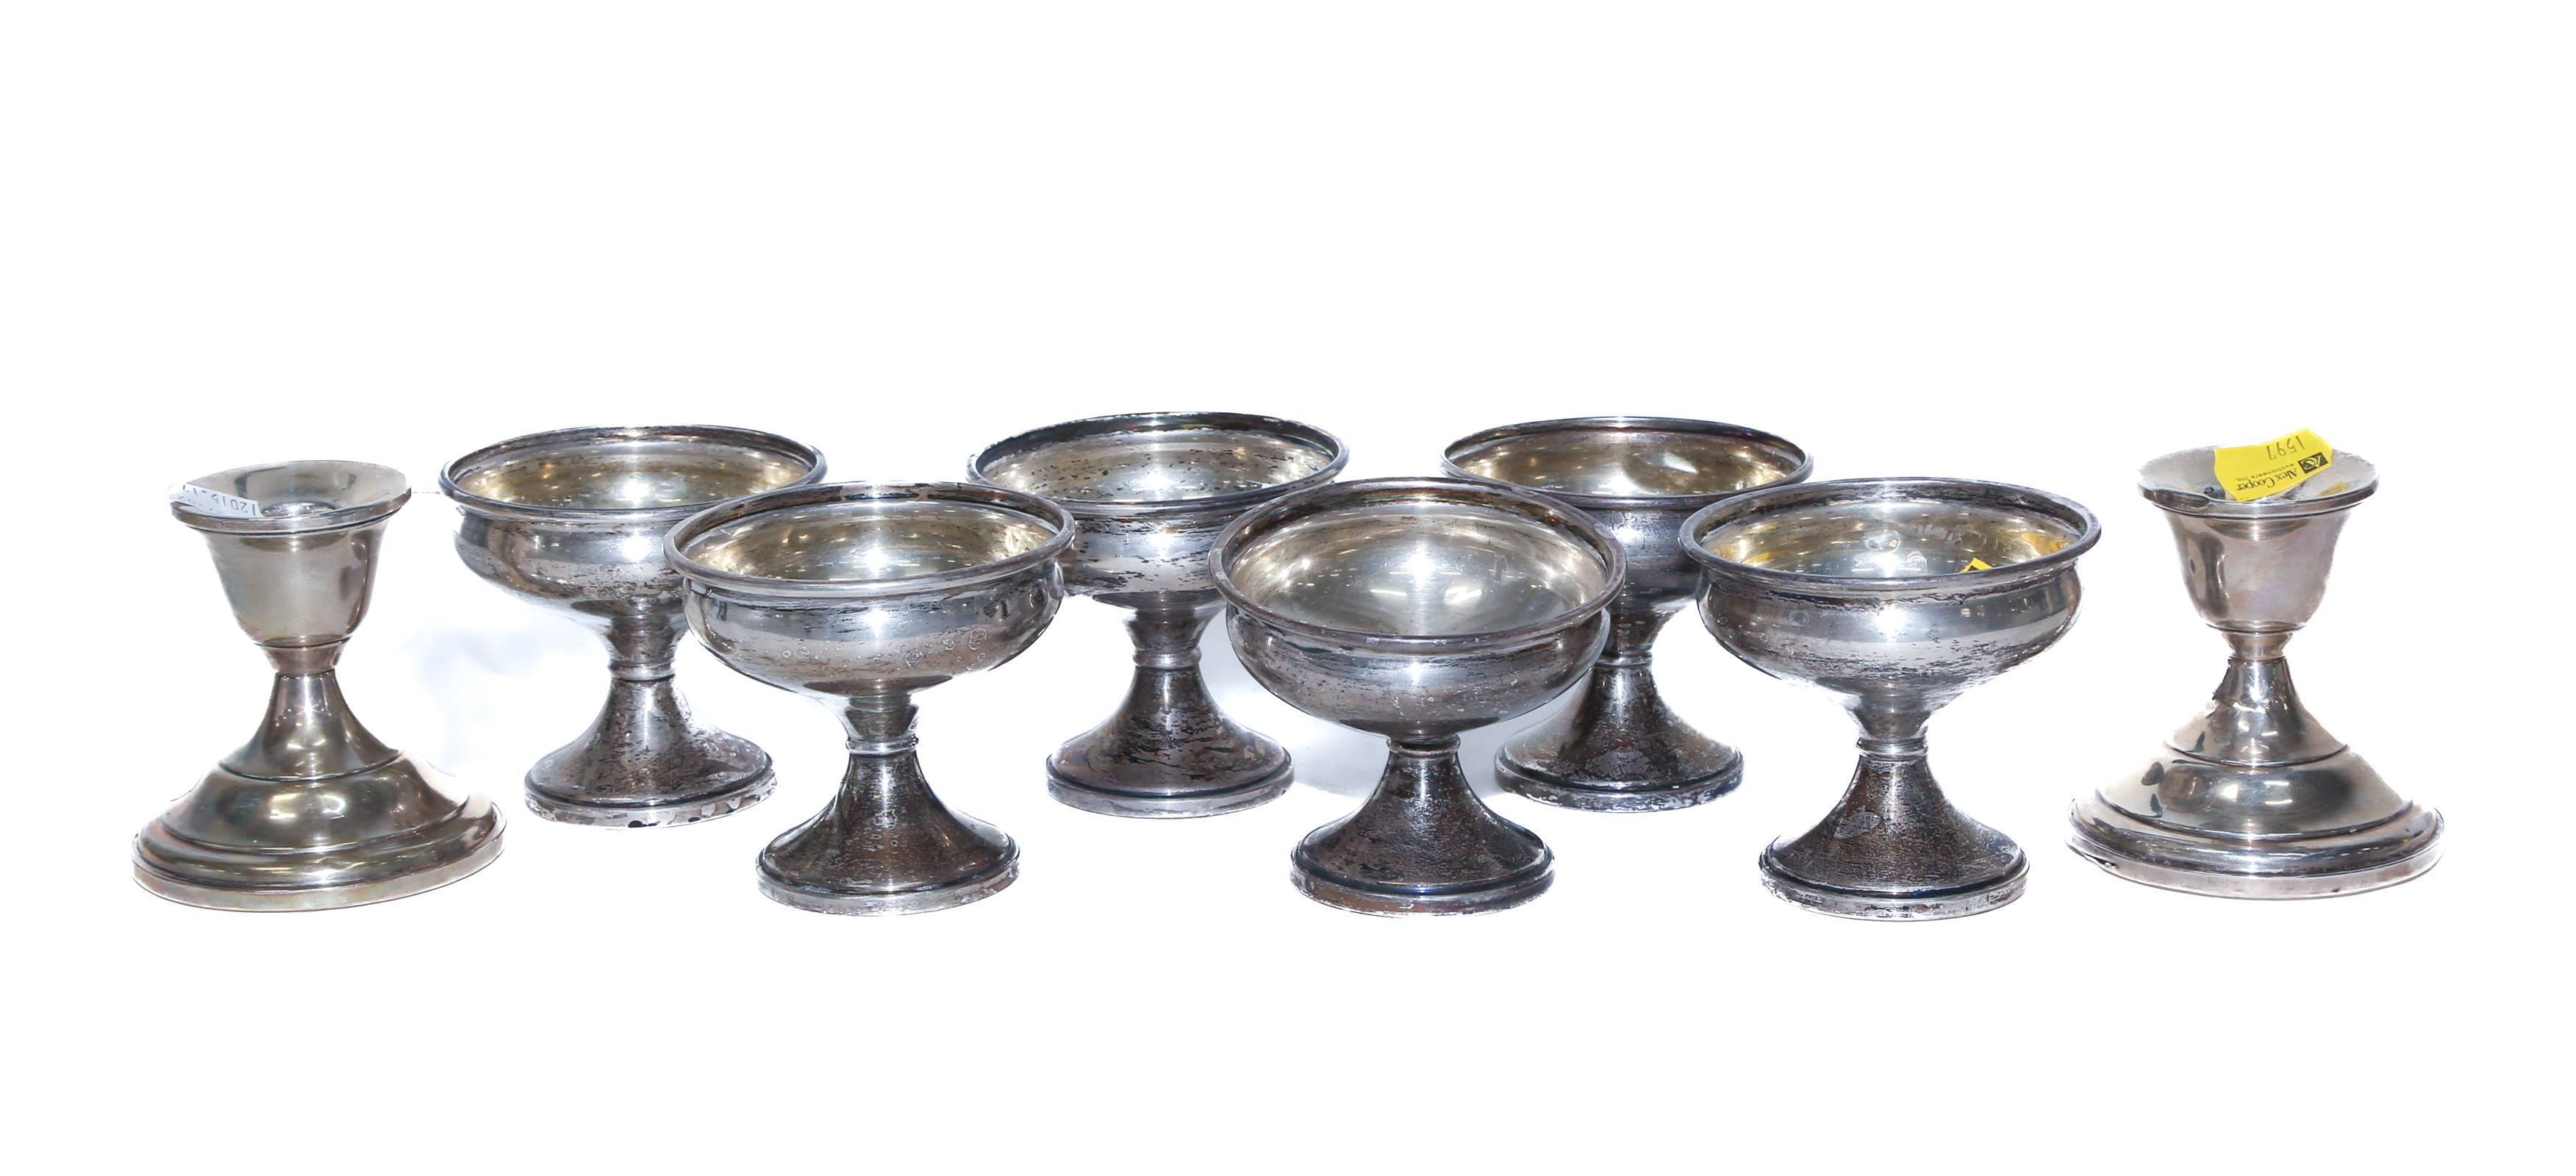 GROUP OF WEIGHTED STERLING HOLLOWWARE 2ea68e